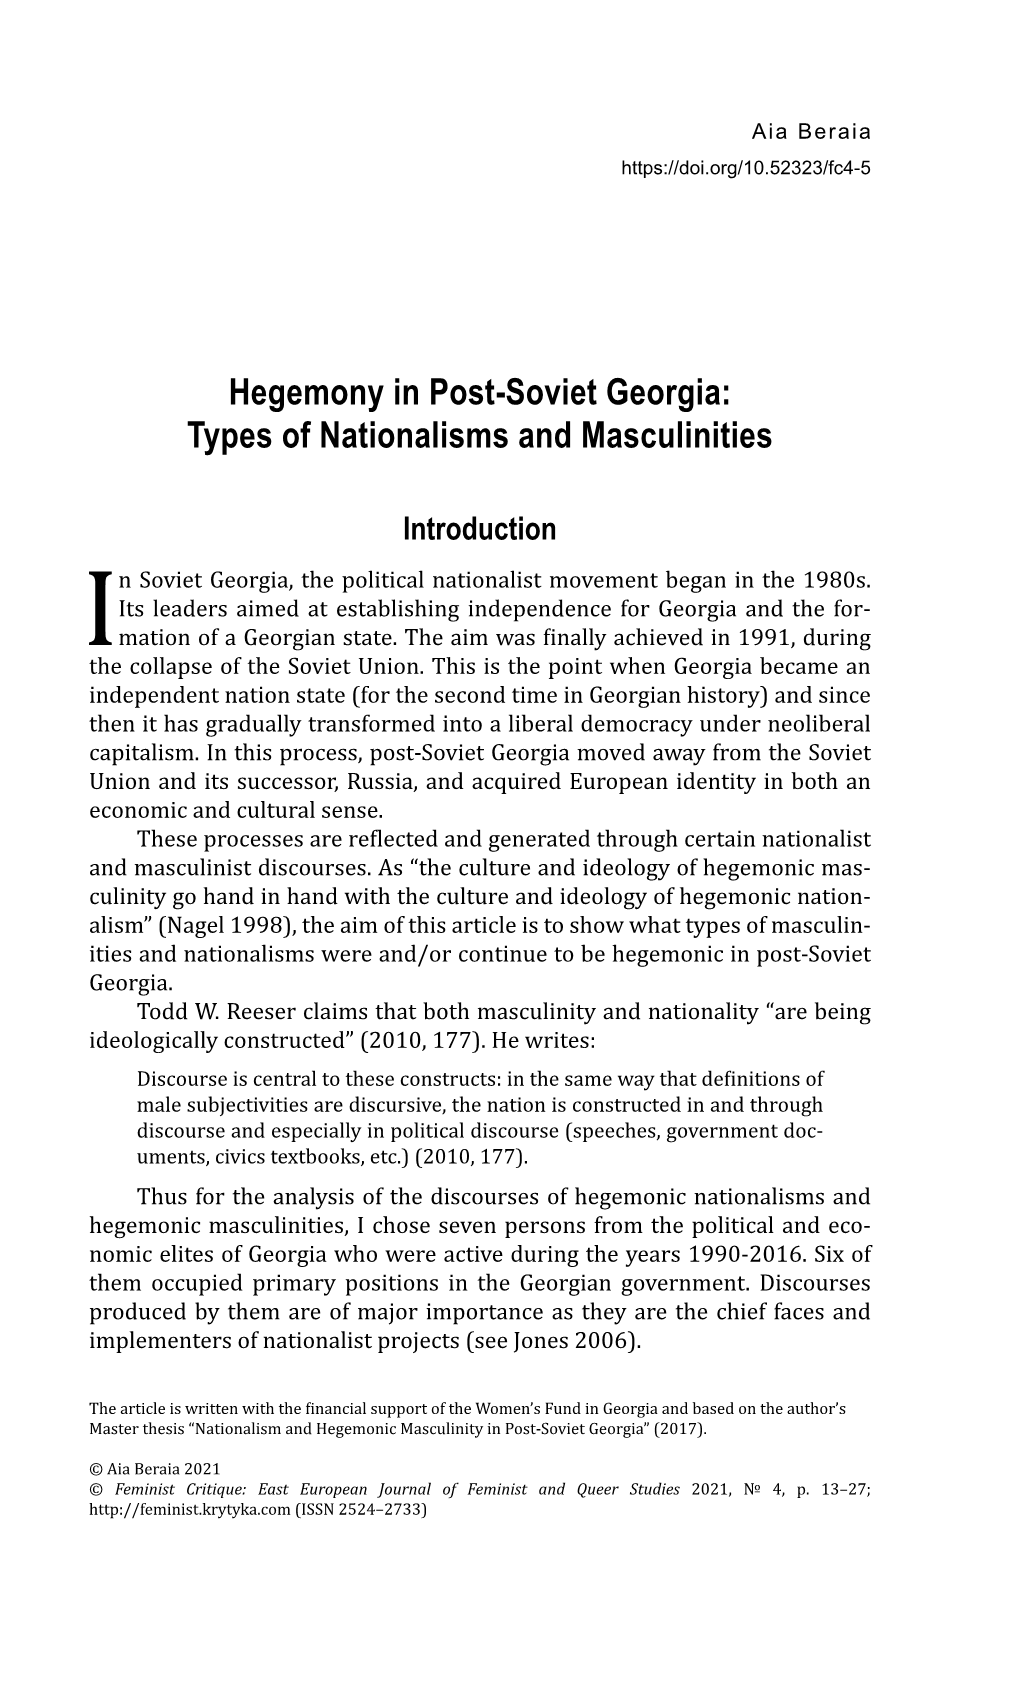 Hegemony in Post-Soviet Georgia: Types of Nationalisms and Masculinities